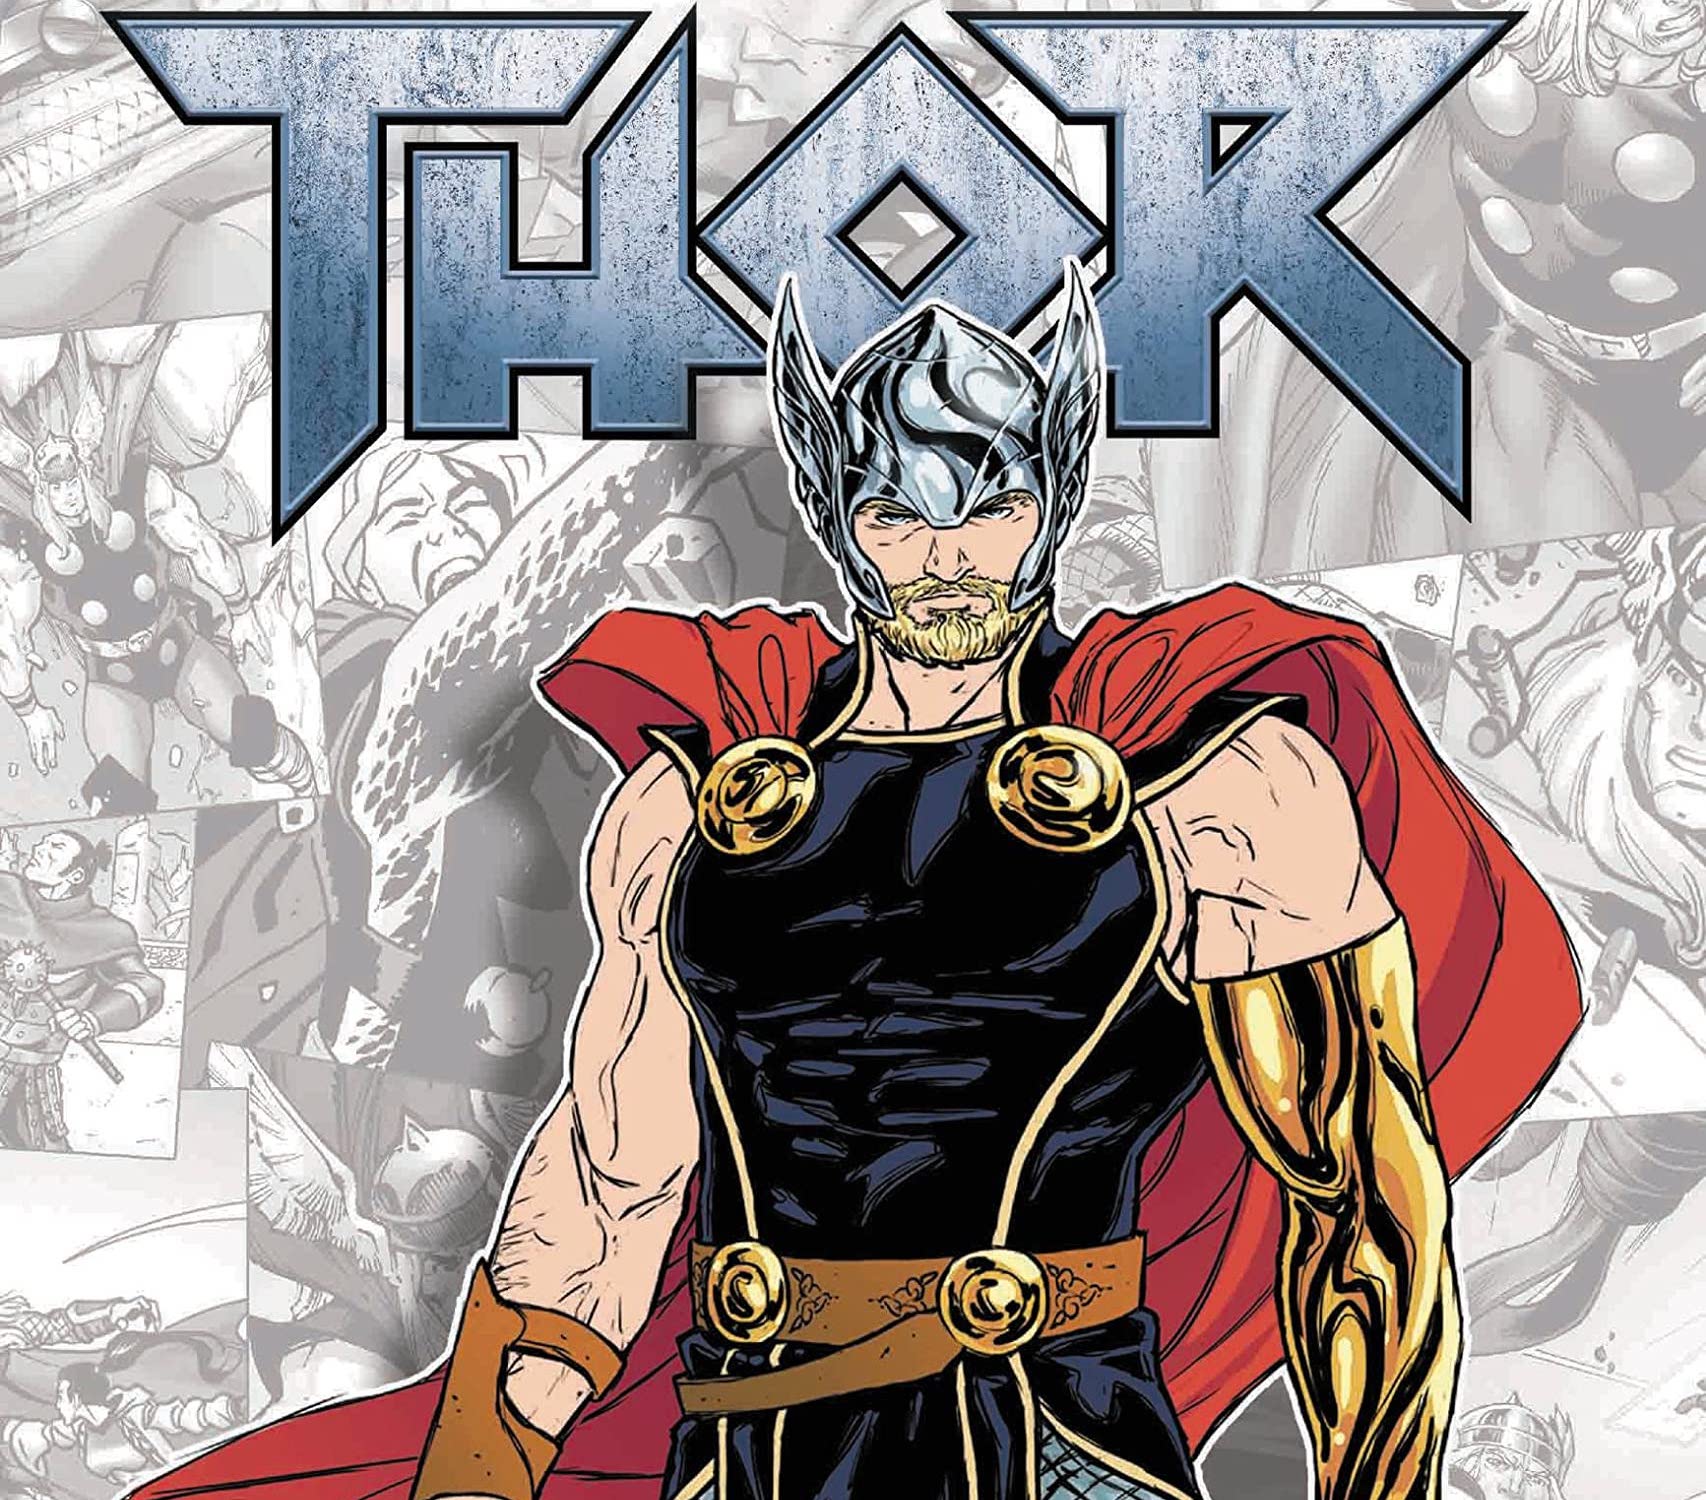 'Marvel-Verse: Thor' is a good kid-friendly collection